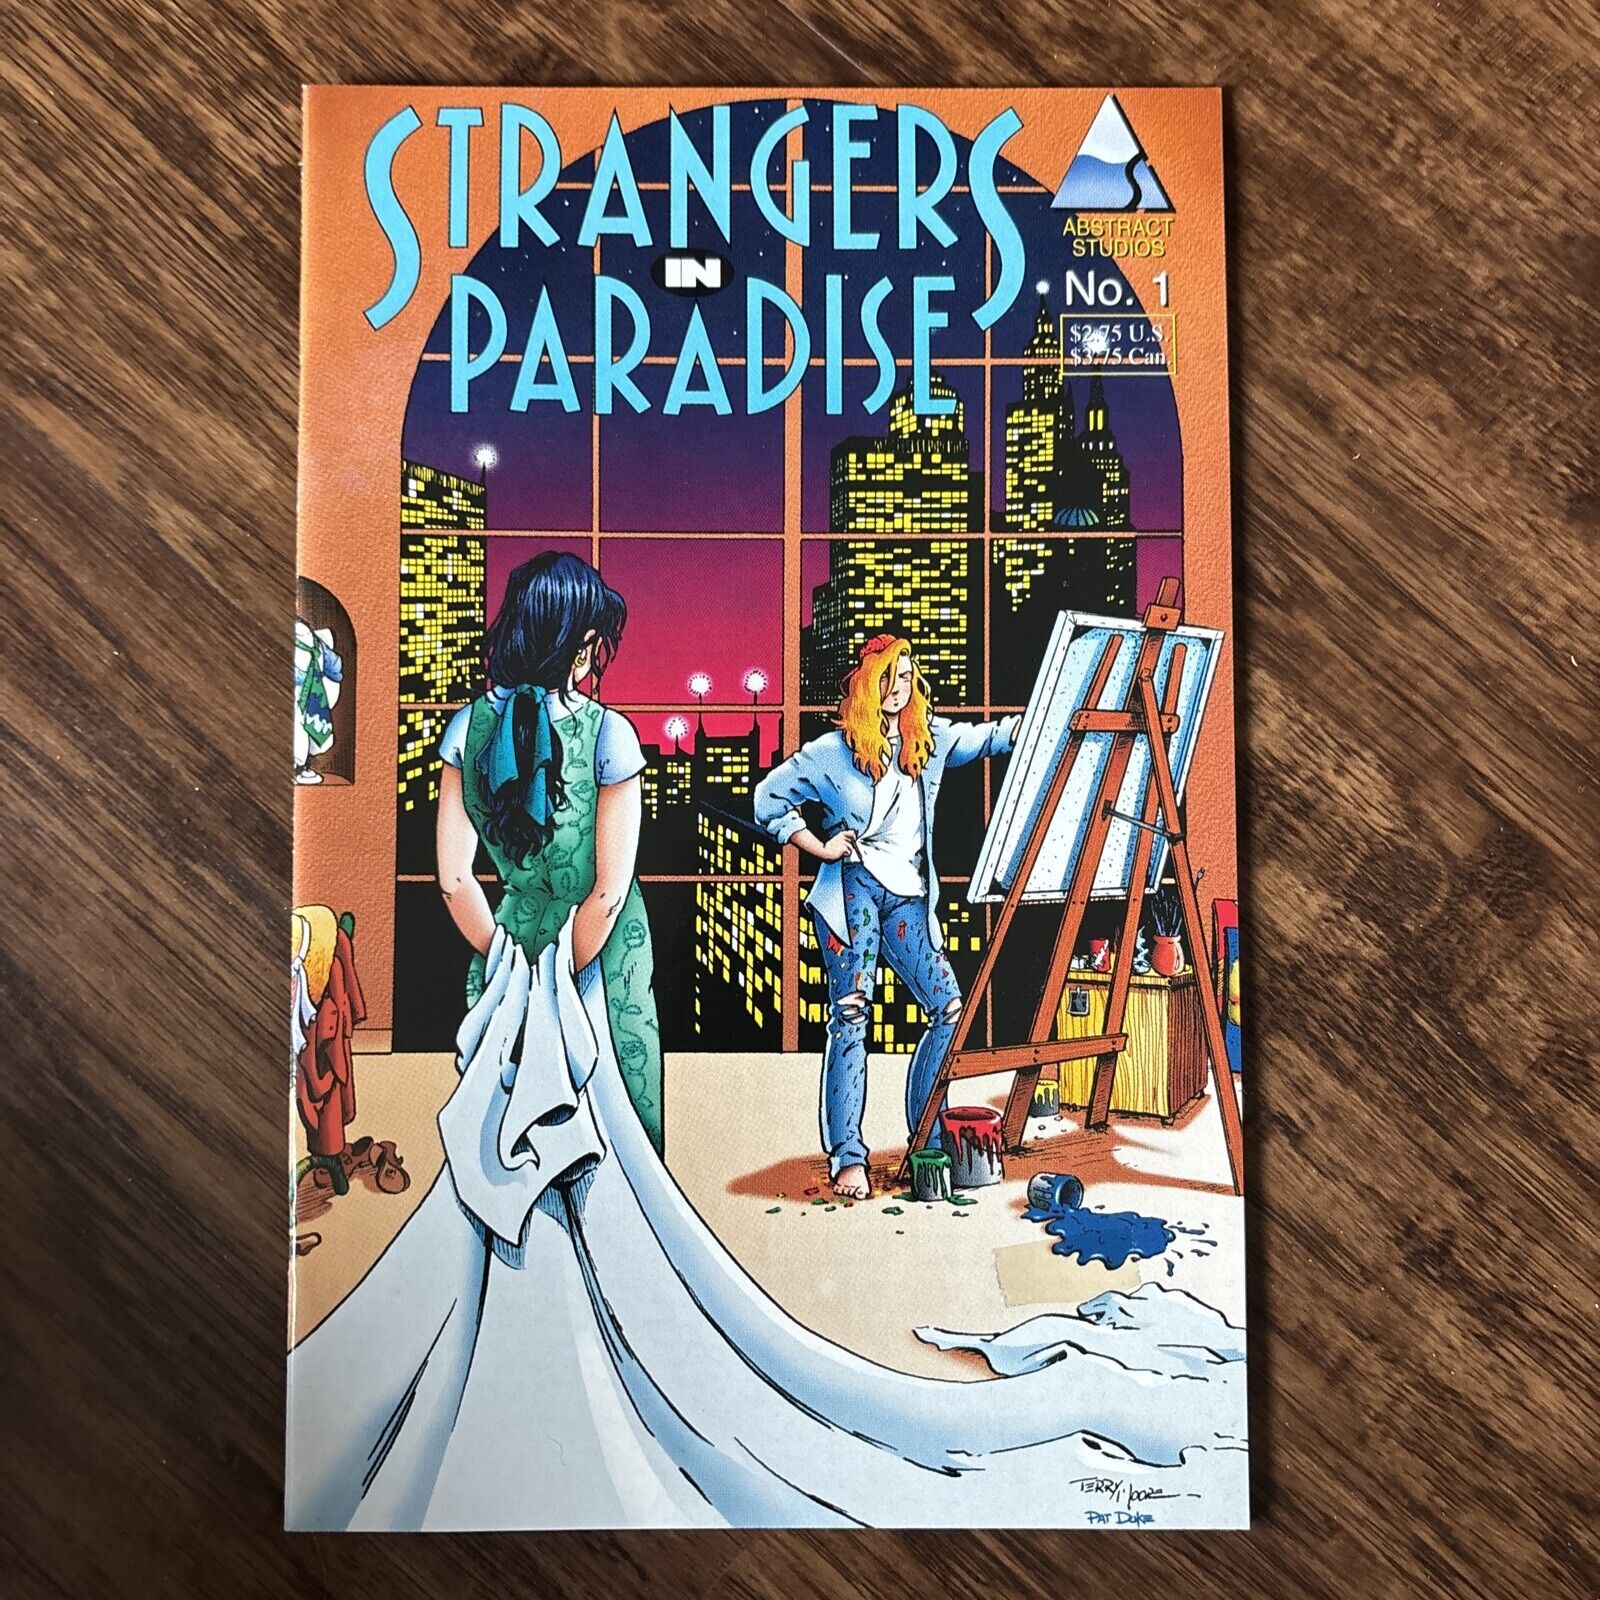 STRANGERS IN PARADISE #1 ABSTRACT STUDIOS 1994 TERRY MOORE .  NM/M